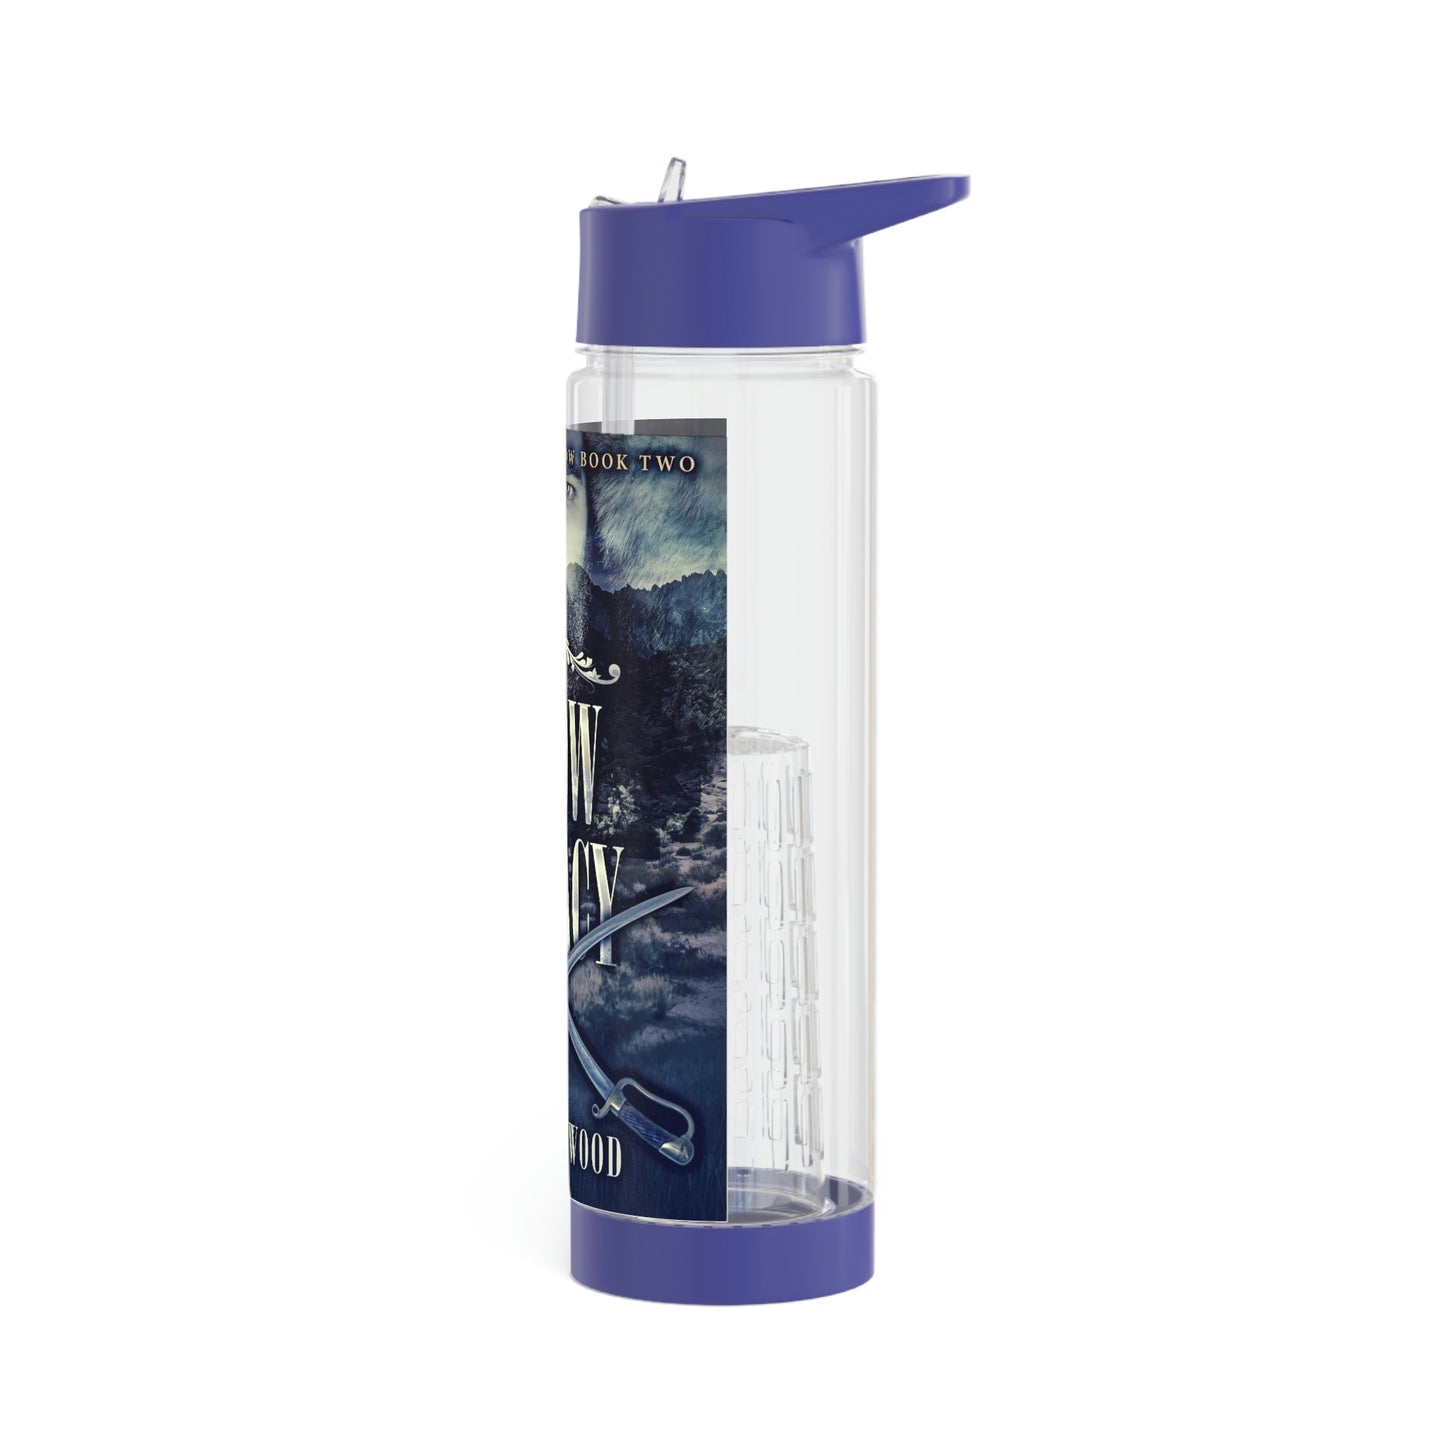 The Crow Legacy - Infuser Water Bottle